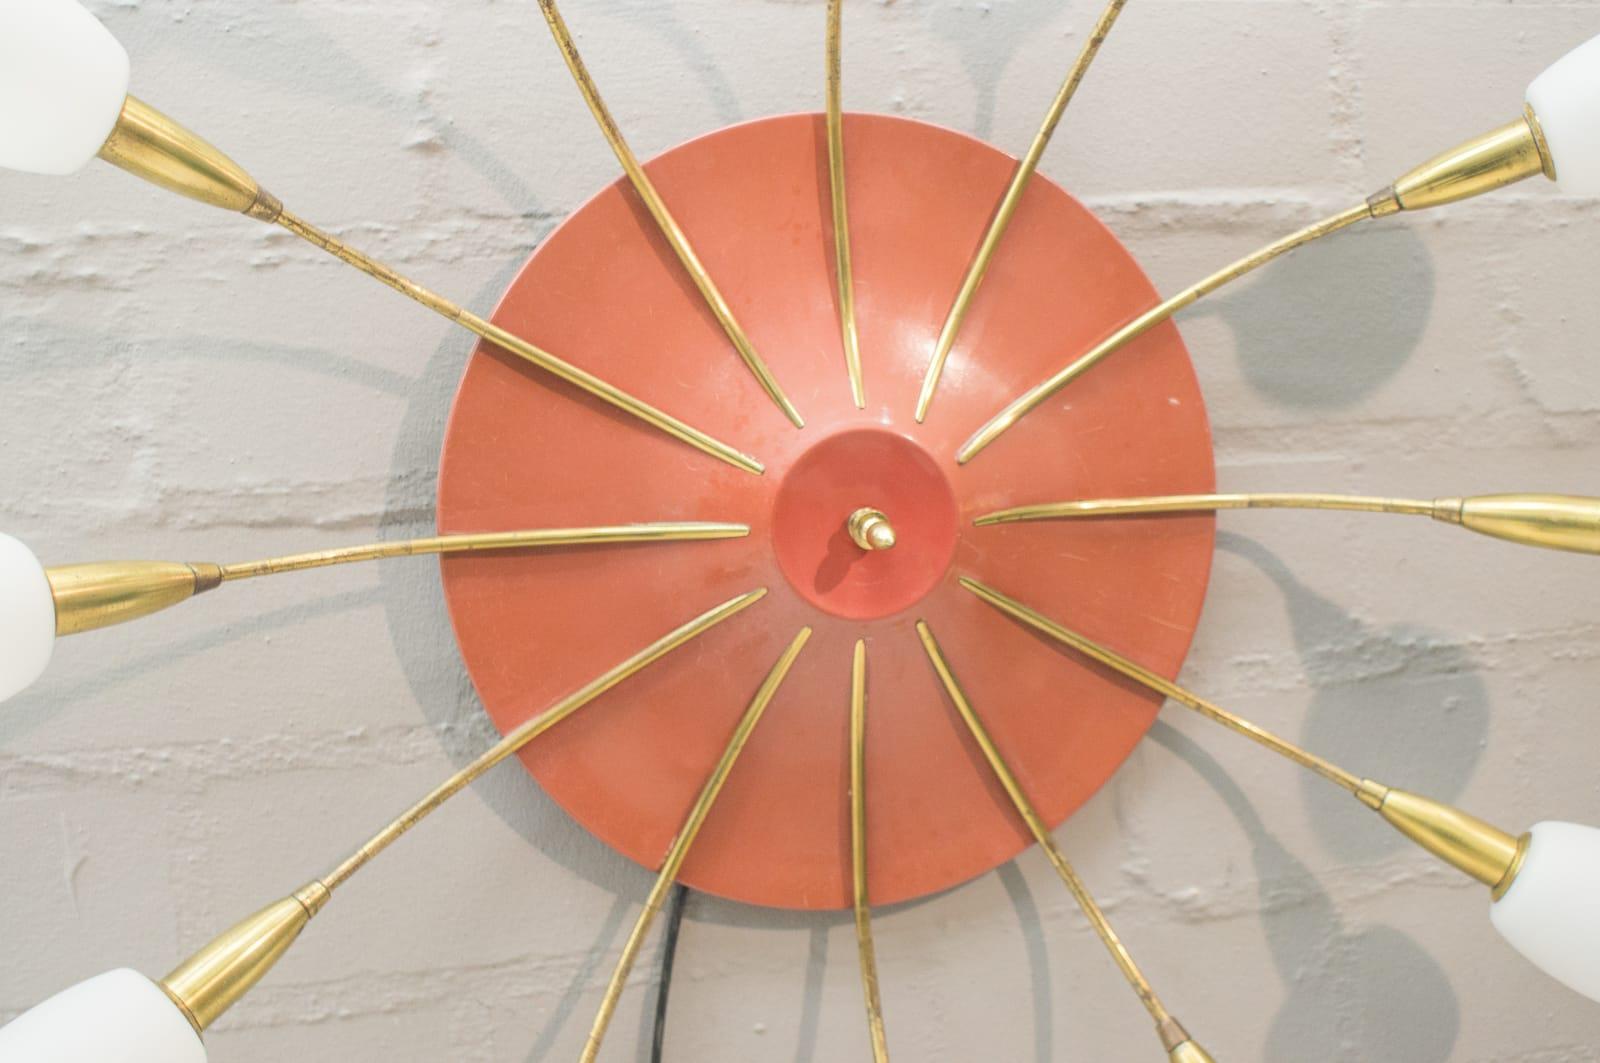 Large Midcentury Wall or Ceiling Sputnik Lamp with 12 Arms, 1950s For Sale 4